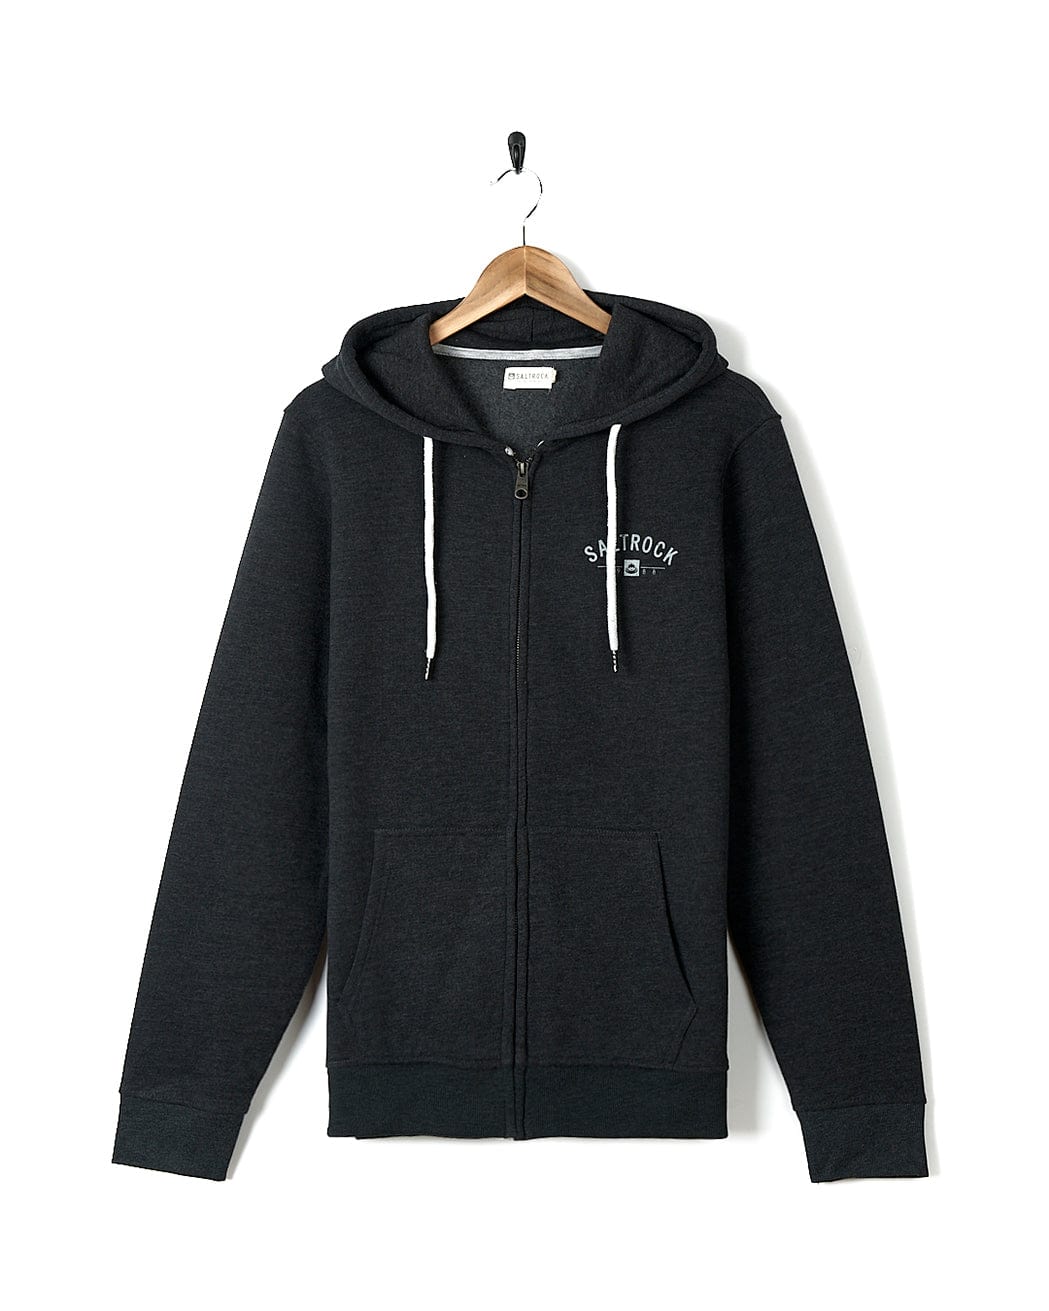 A Saltrock Location Zip Hoodie - Poole - Dark Grey with a white logo on it.